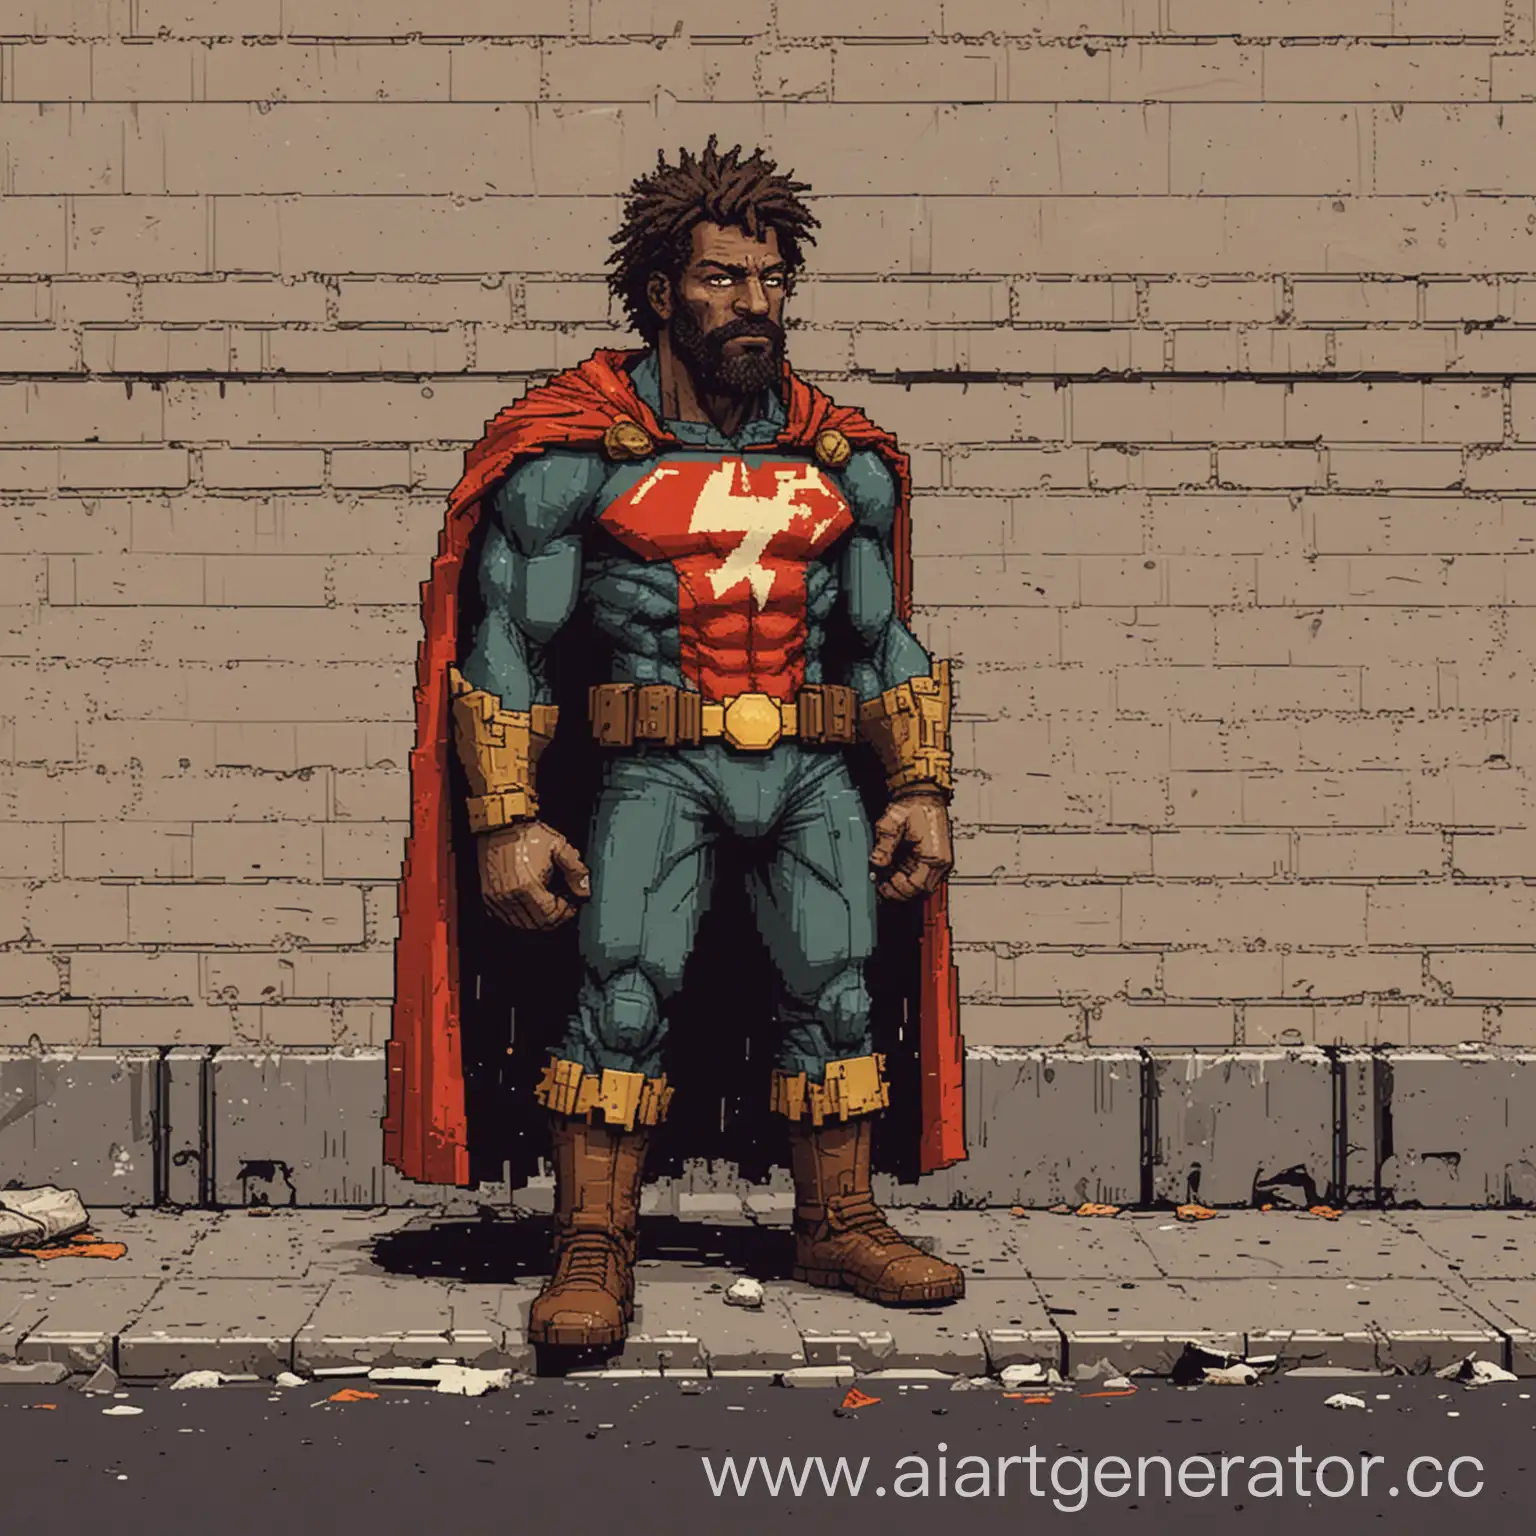 A homeless superhero in the style of pixel art